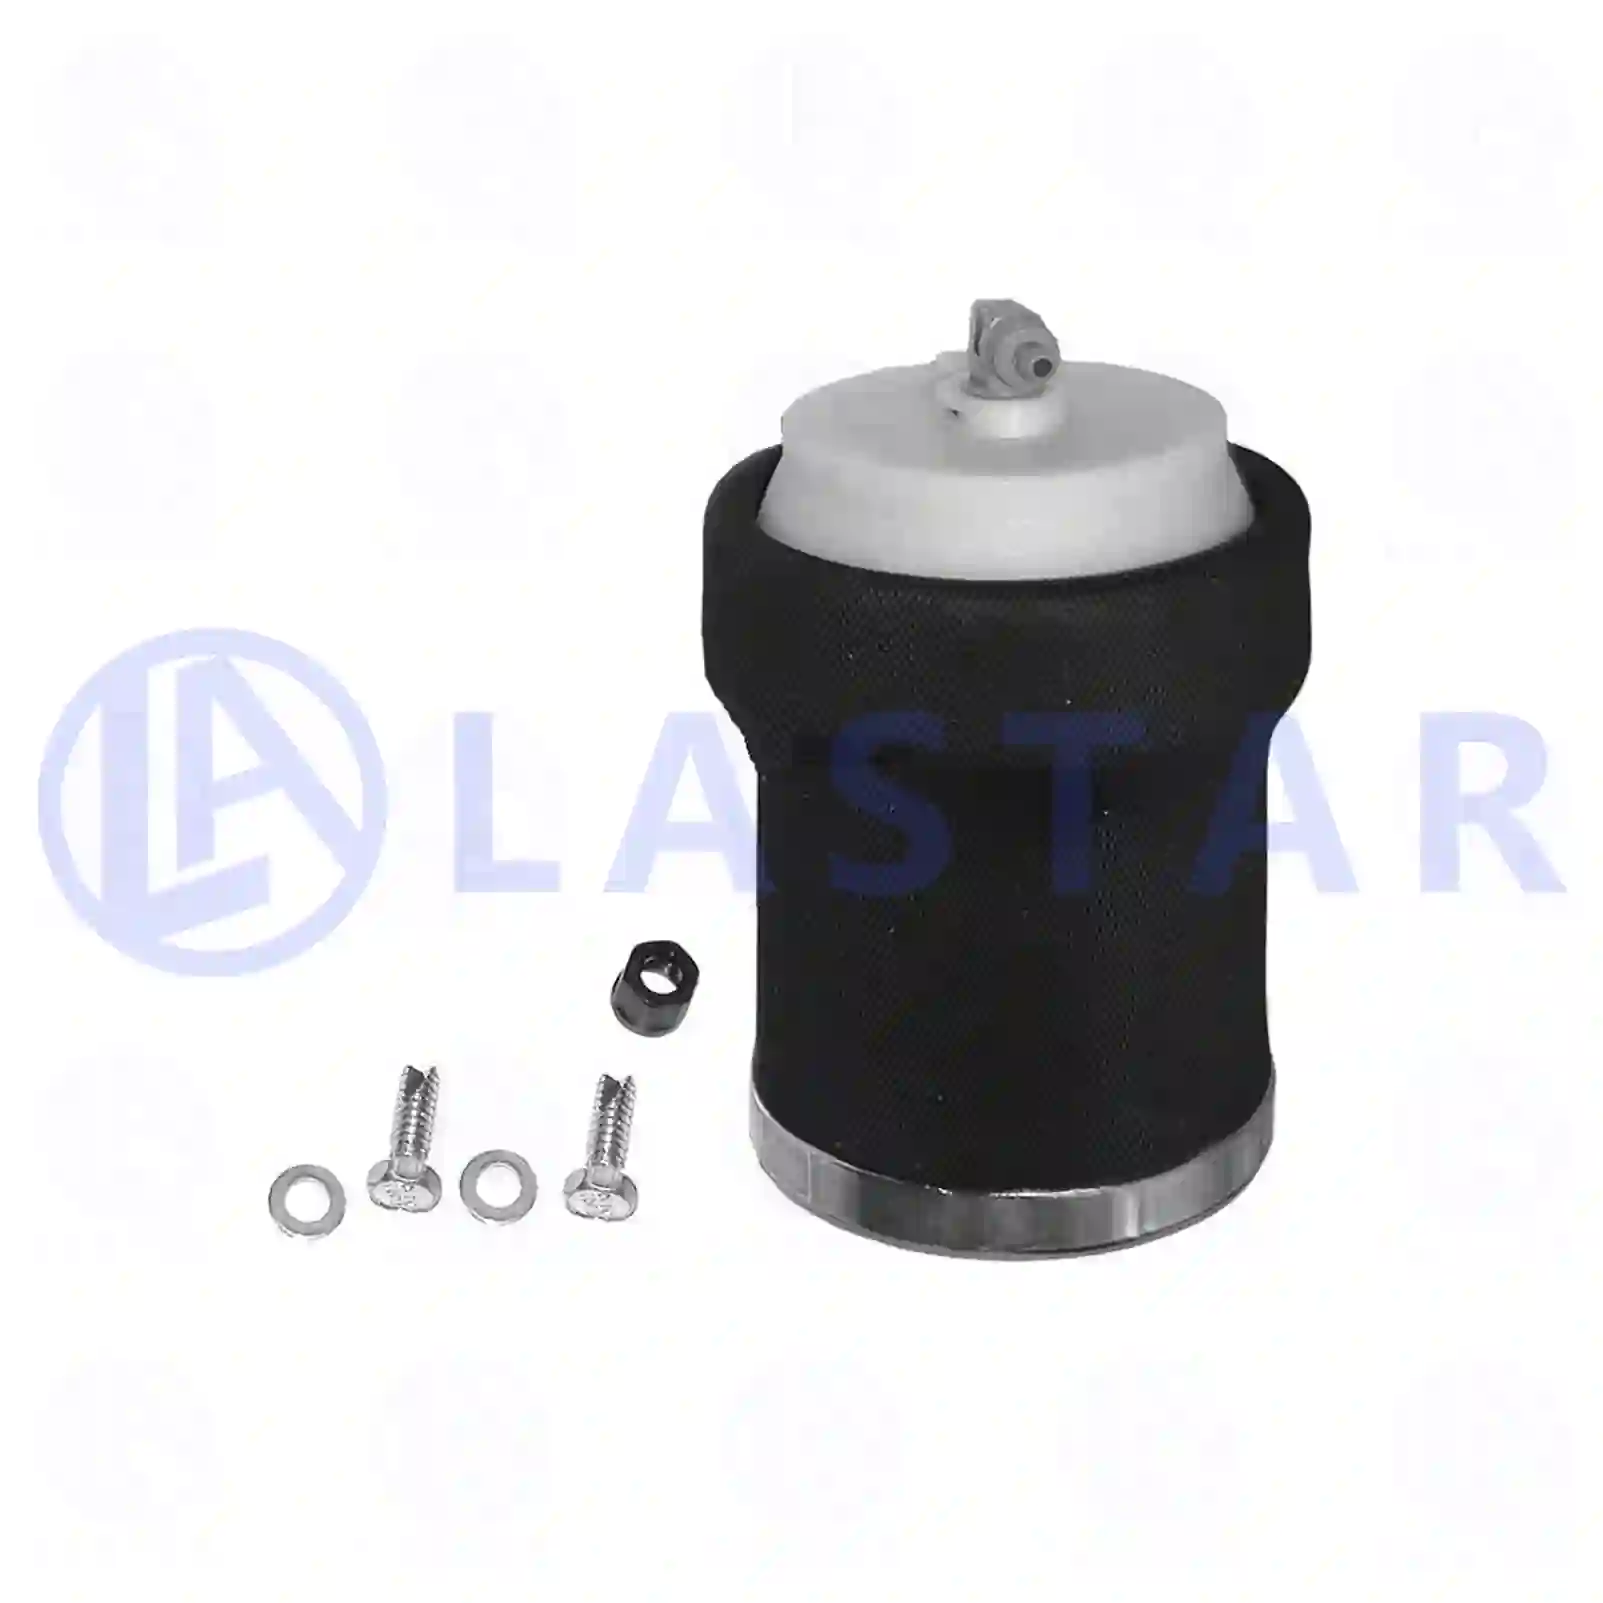 Air spring, seat, 77734523, 1313004, 360113 ||  77734523 Lastar Spare Part | Truck Spare Parts, Auotomotive Spare Parts Air spring, seat, 77734523, 1313004, 360113 ||  77734523 Lastar Spare Part | Truck Spare Parts, Auotomotive Spare Parts